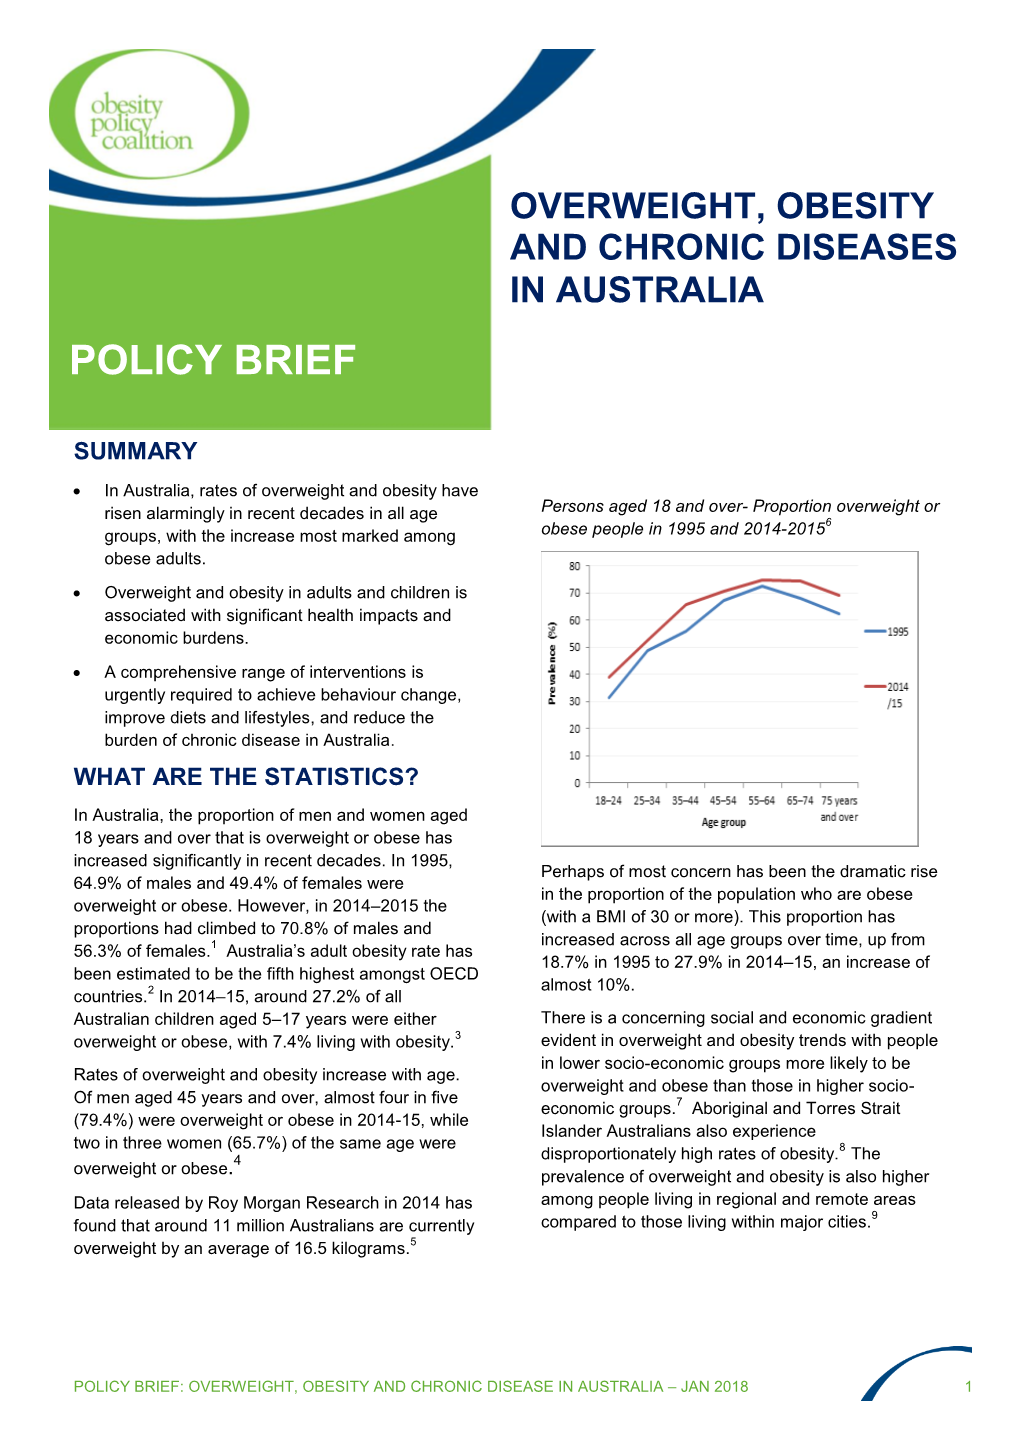 Overweight Obesity and Chronic Disease in Australia